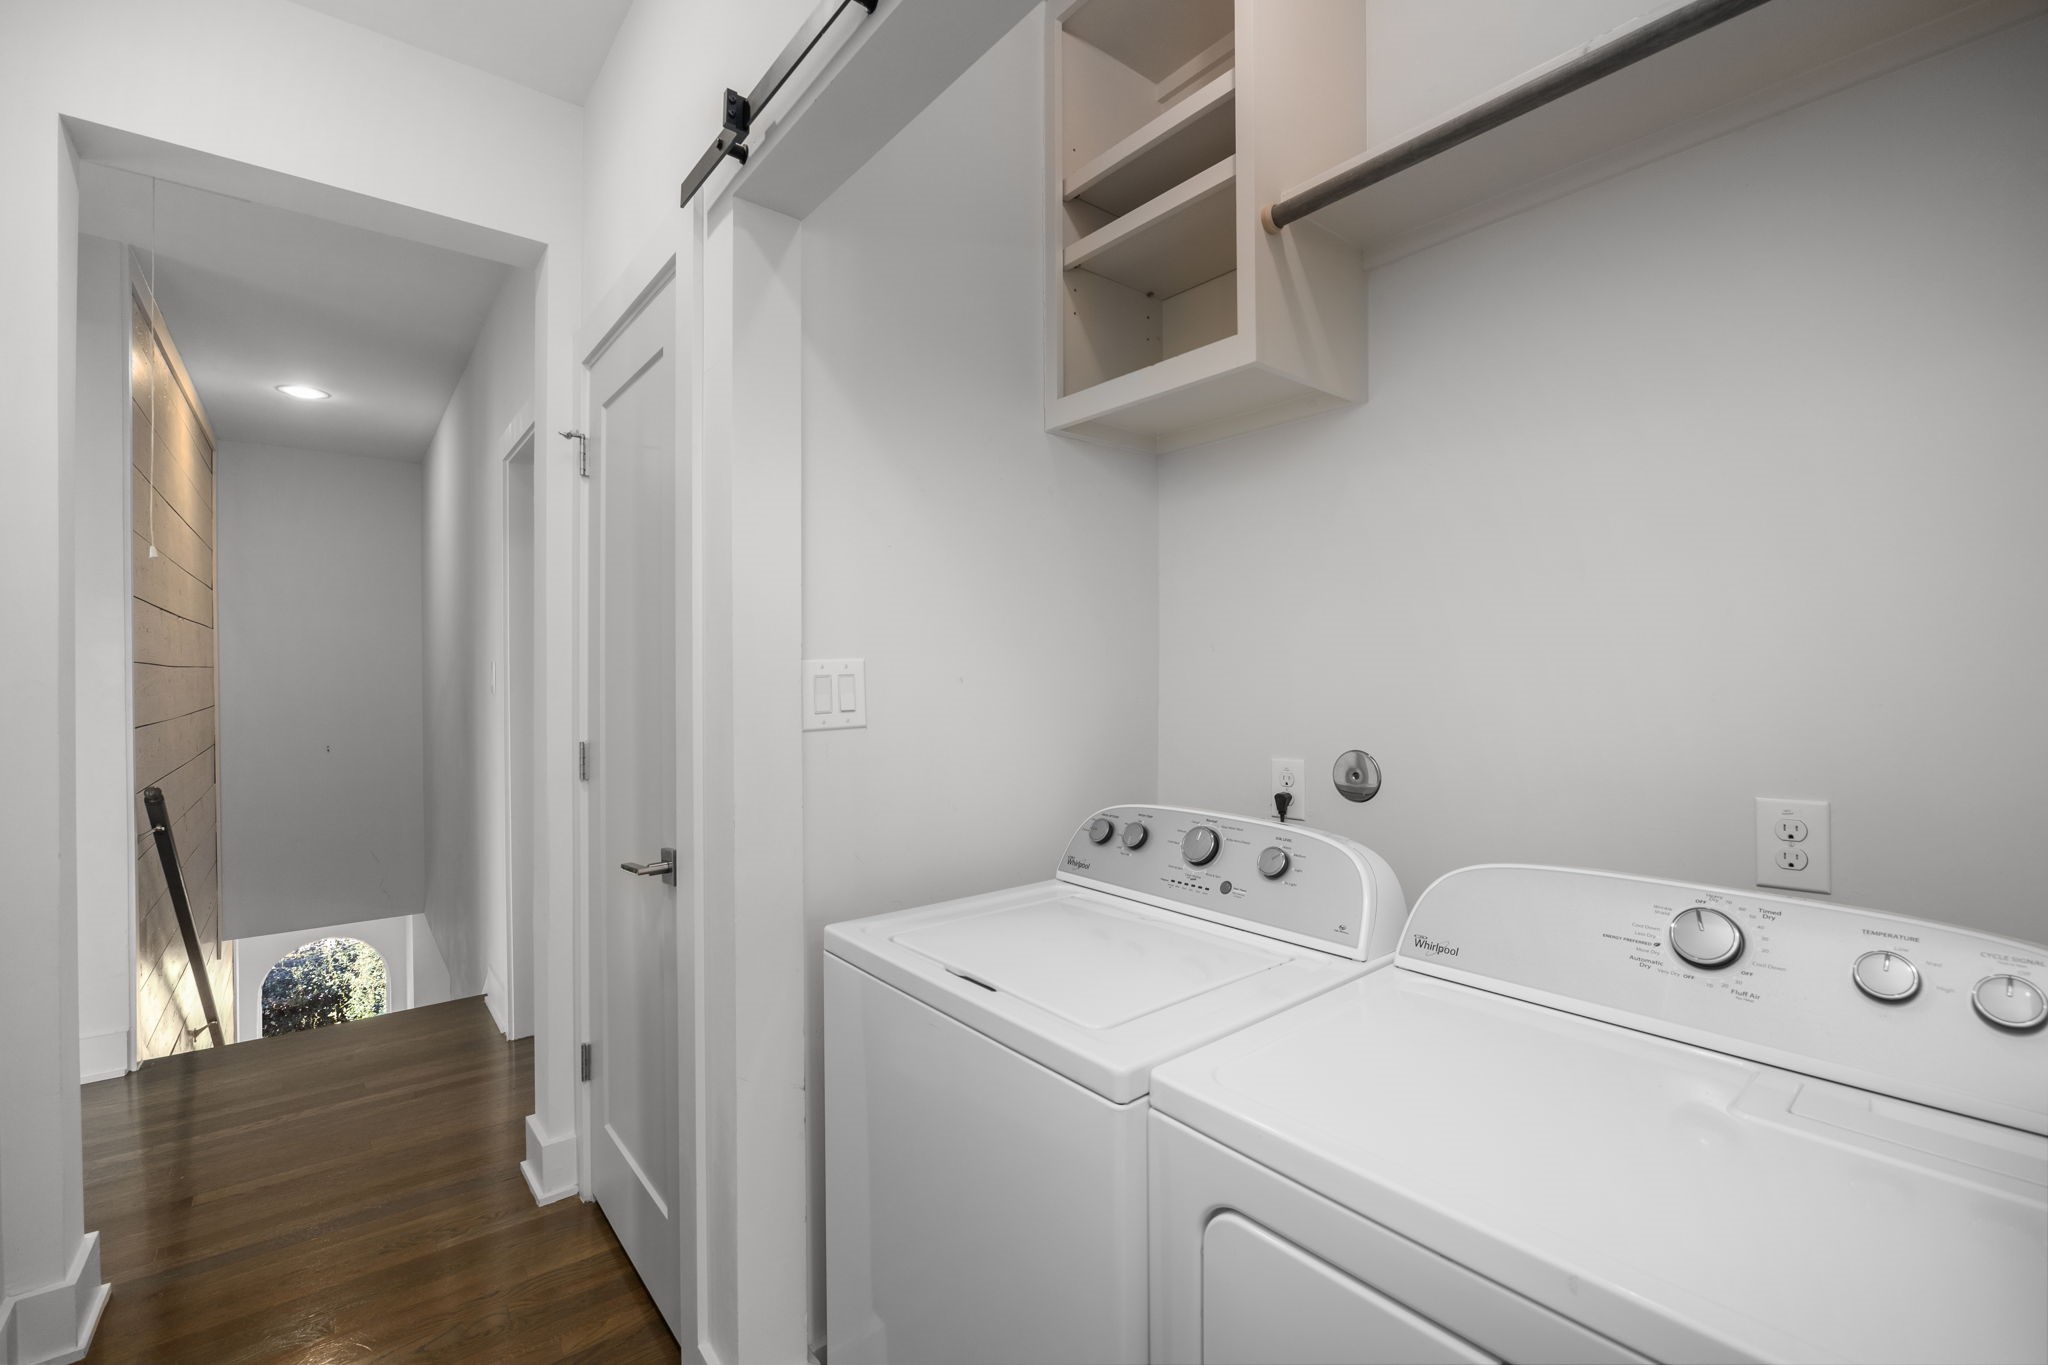 Laundry room is also located upstairs conveniently close to the bedrooms.